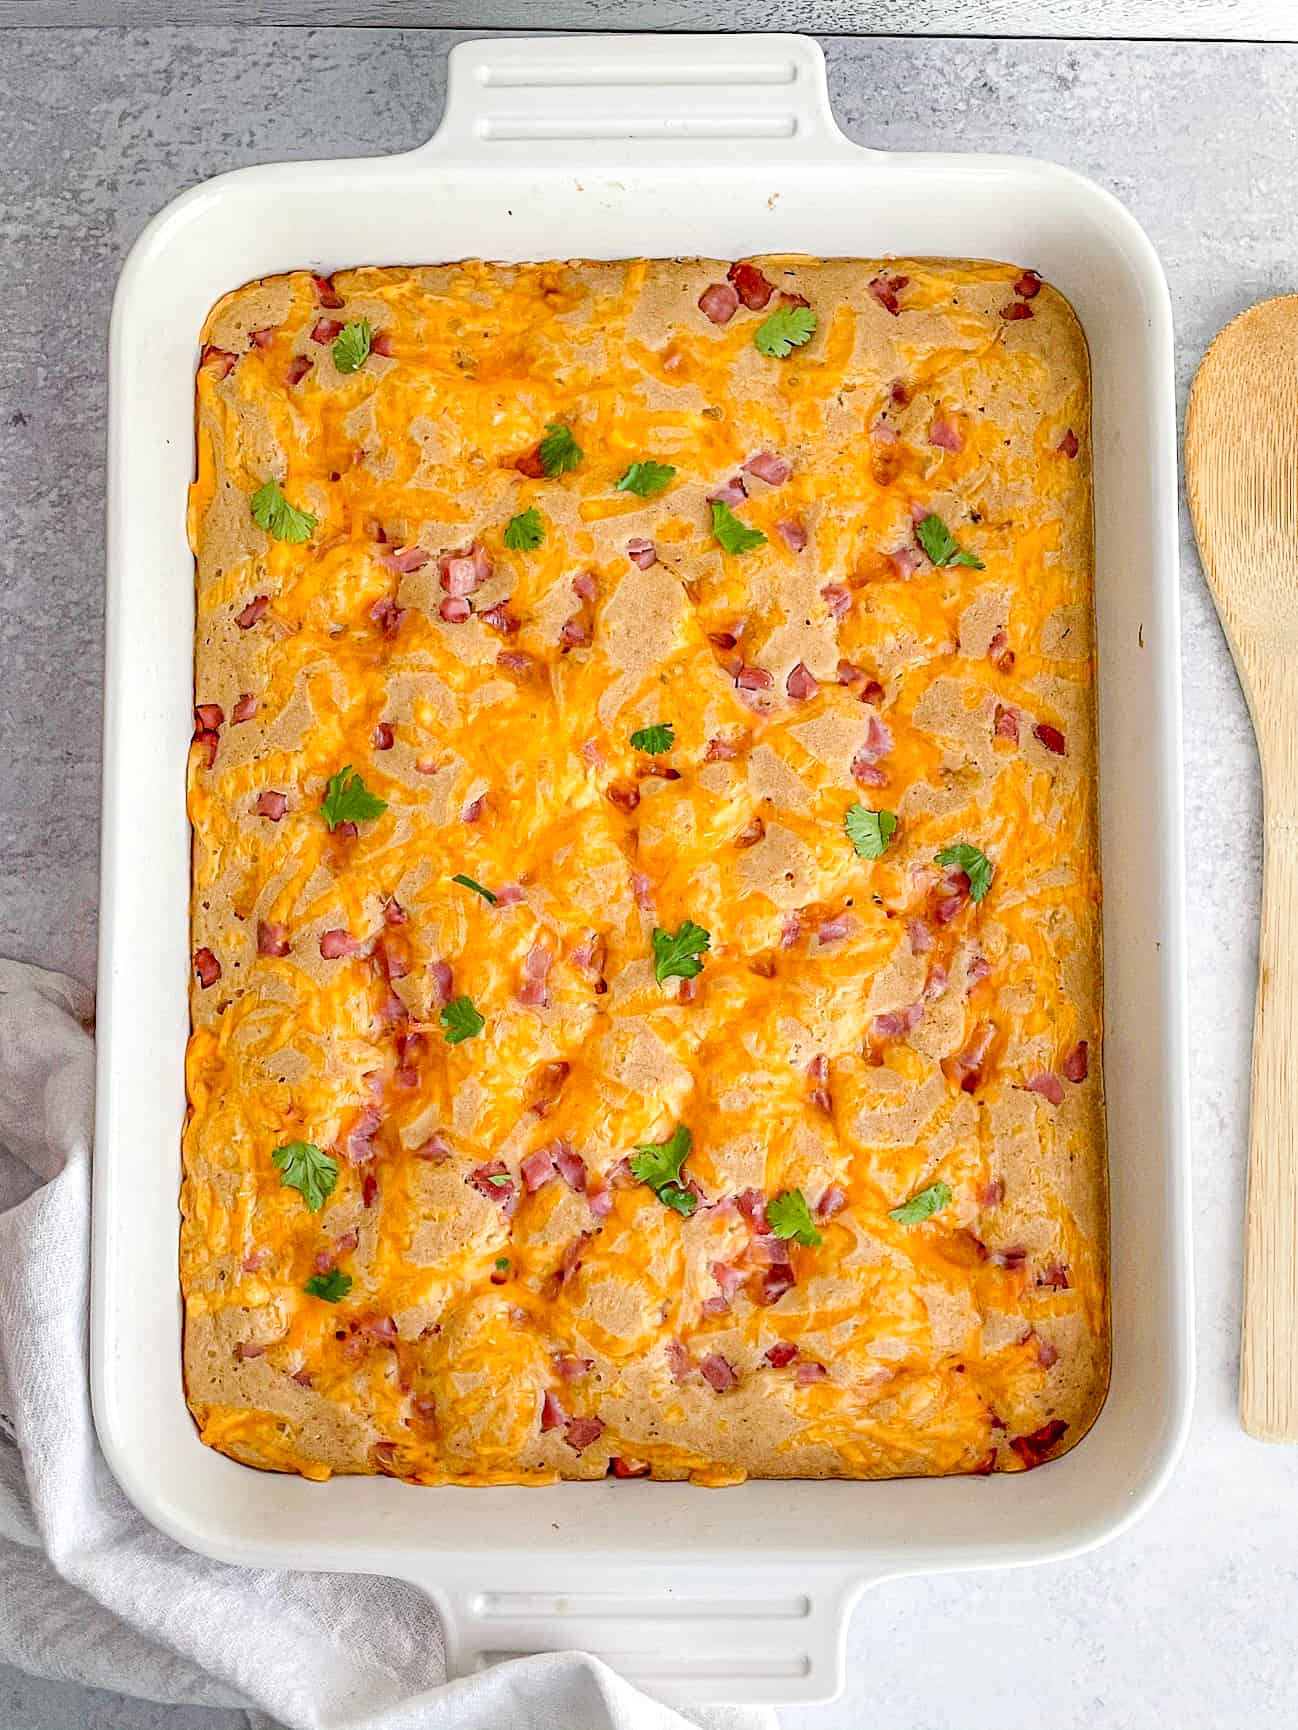 Ham and cheese breakfast bake in a casserole dish.